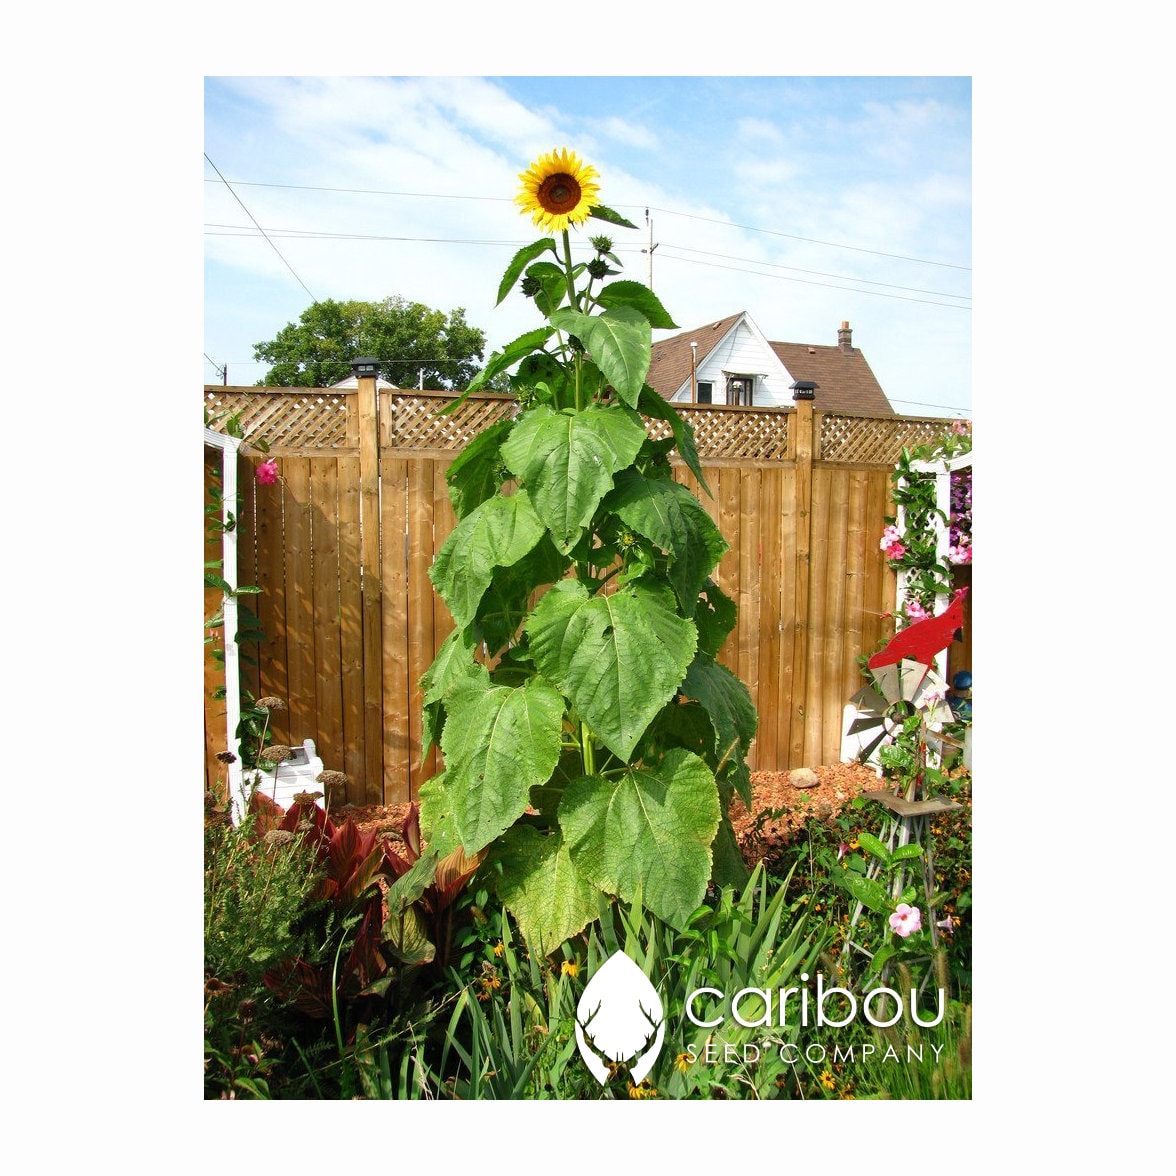 Annual GIGANTEUS SUNFLOWER   21 seeds   21 Ft. Tall   Attracts Bees &  Pollinators   Fresh, Organic Seed